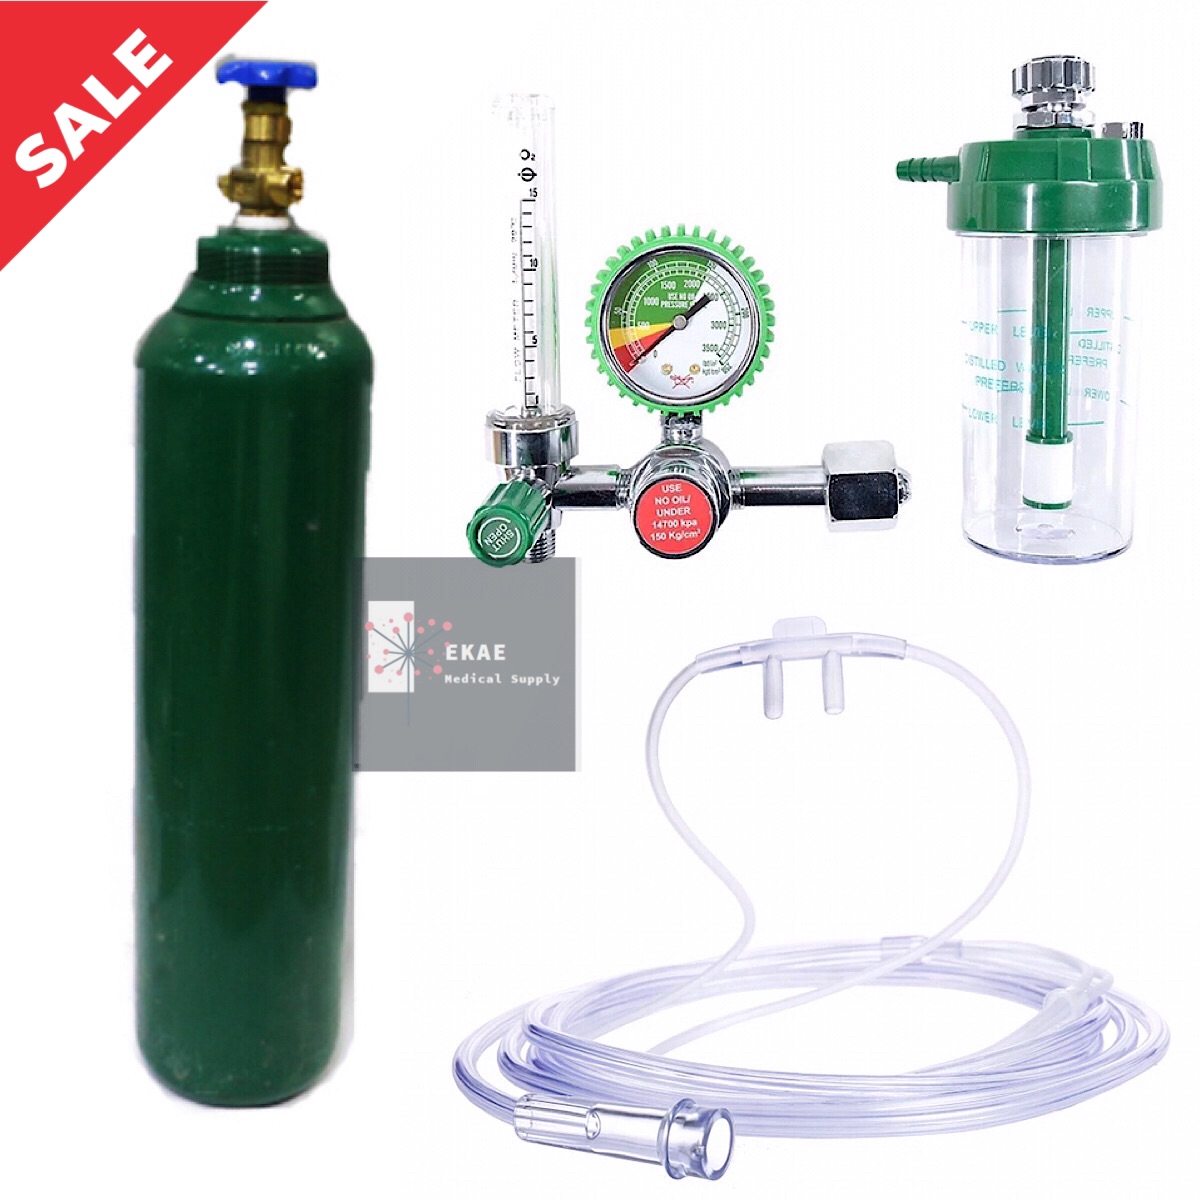 10lbs Medical Oxygen Tank With Medical Oxygen Regulator Full Content